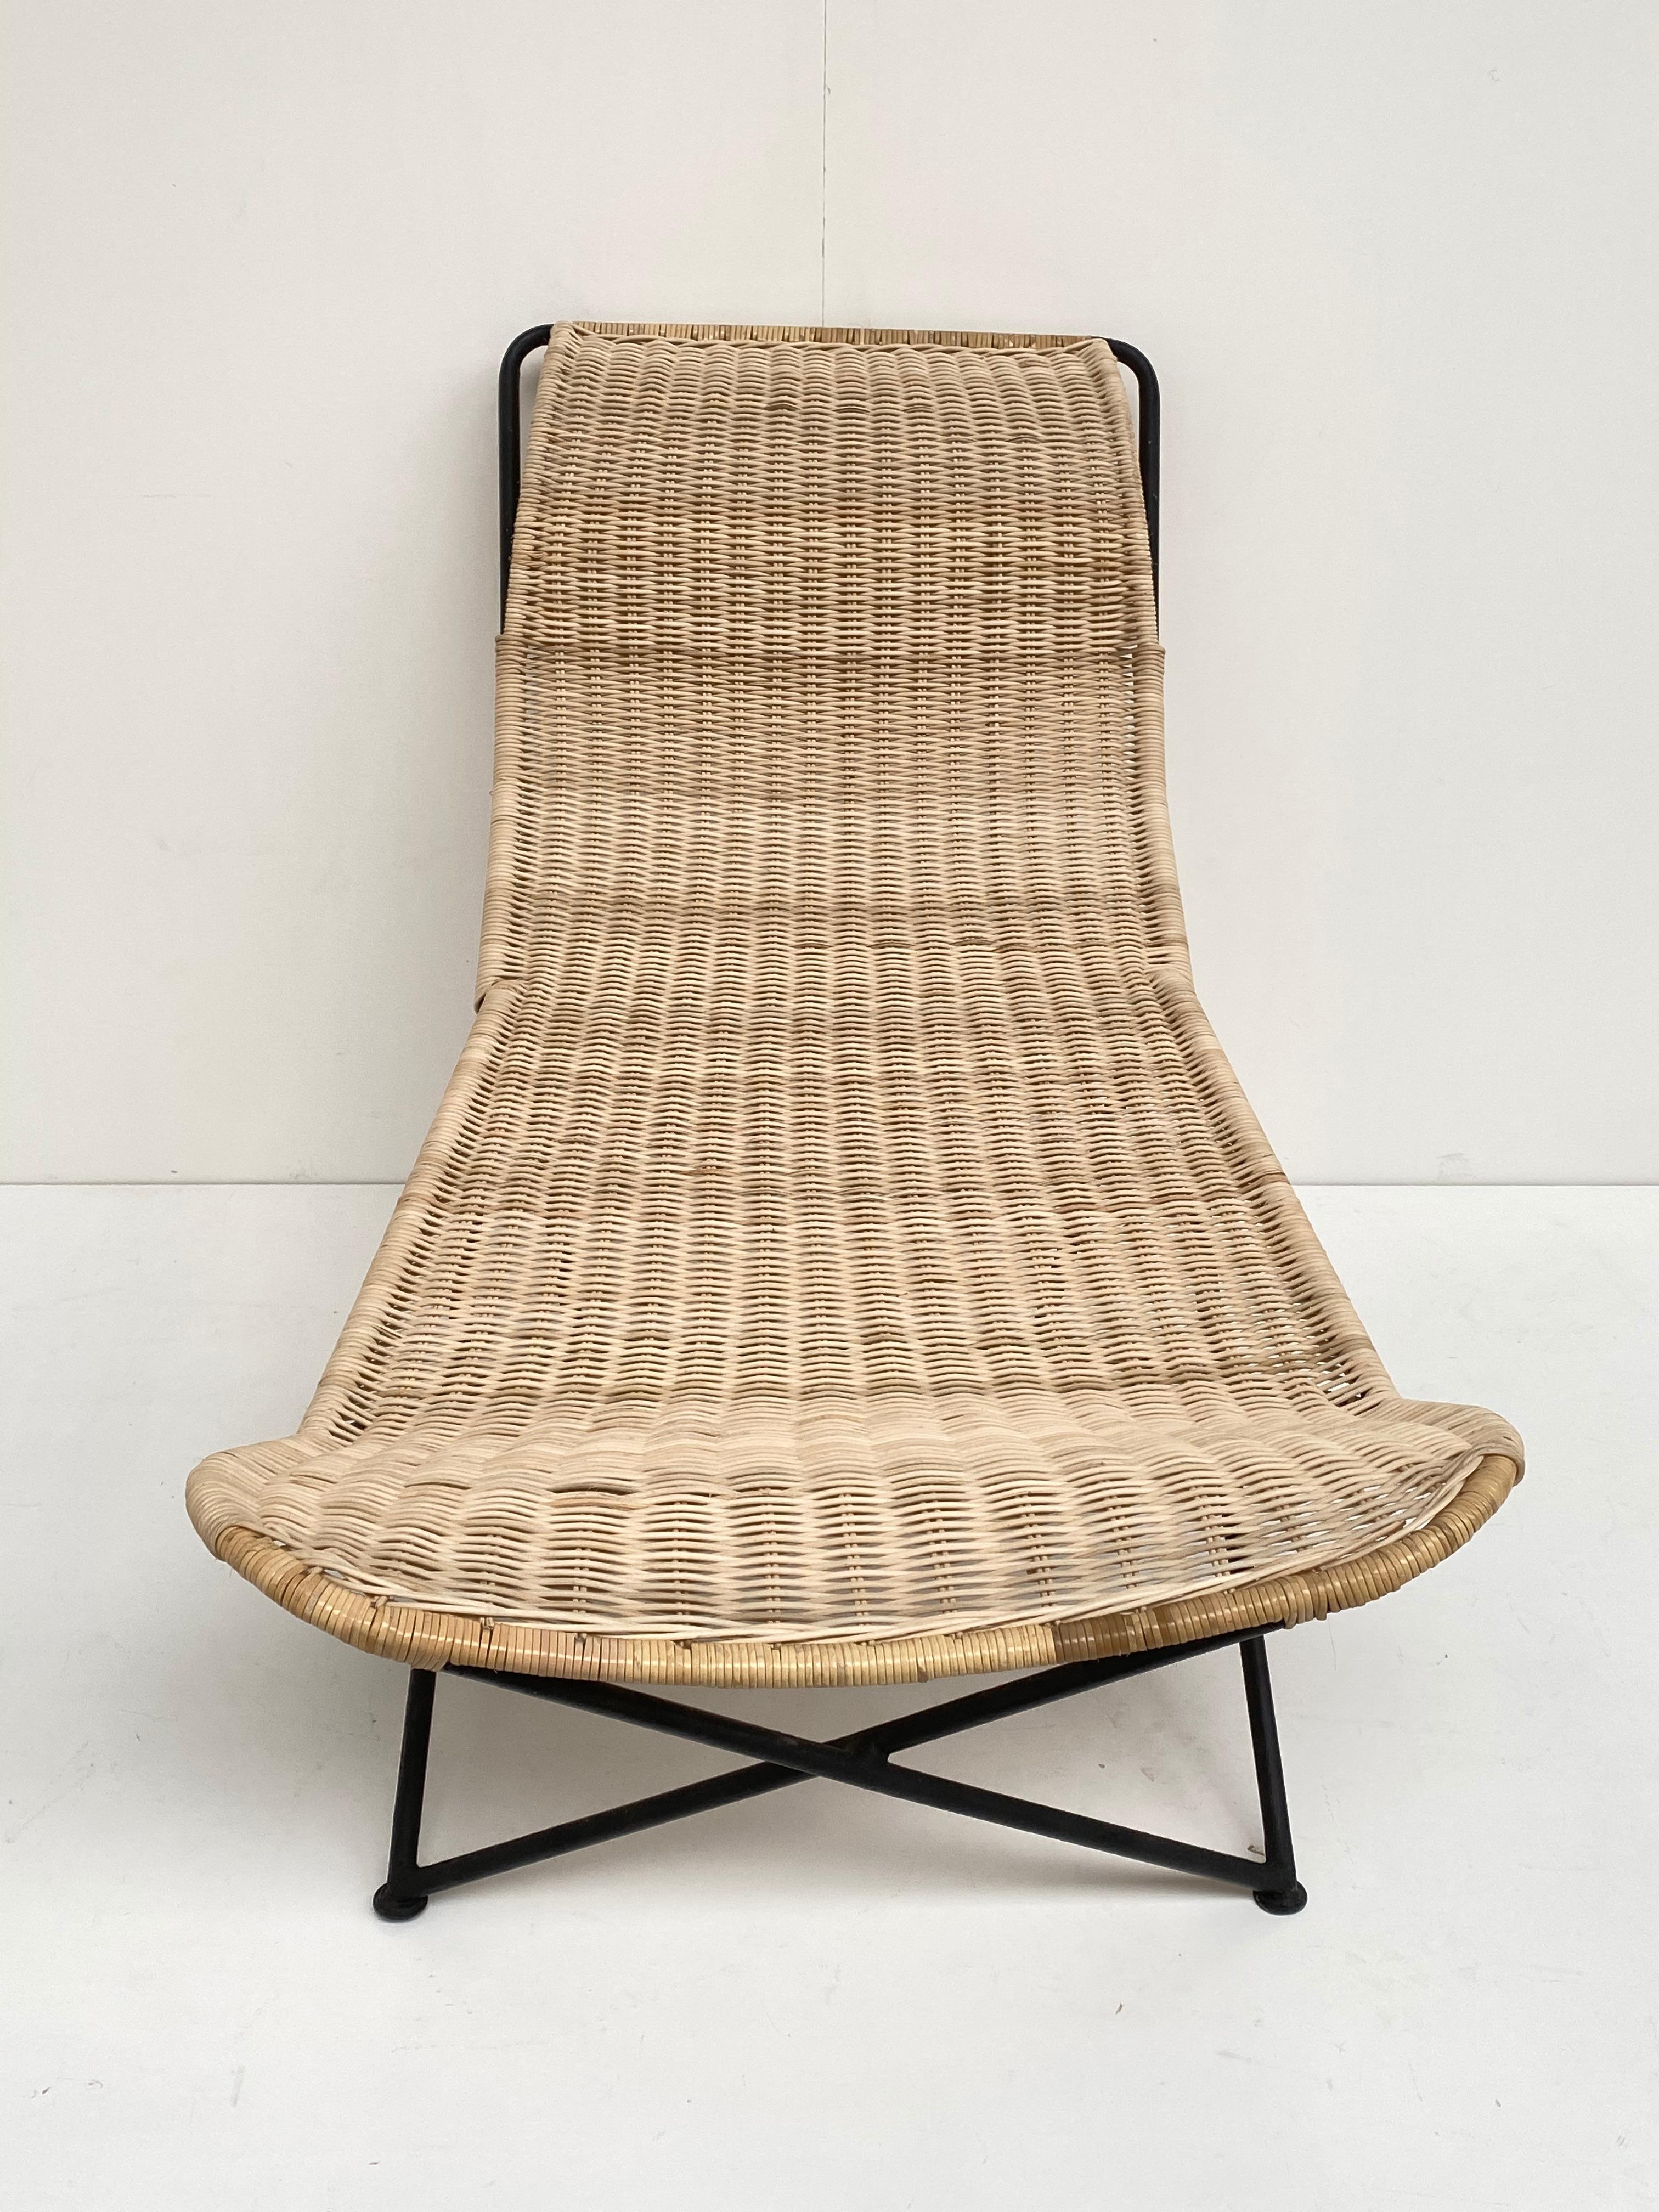 Stunning Sculptural Form Wicker Chaise Attributed to Raoul Guys, France, 1950's In Good Condition For Sale In bergen op zoom, NL